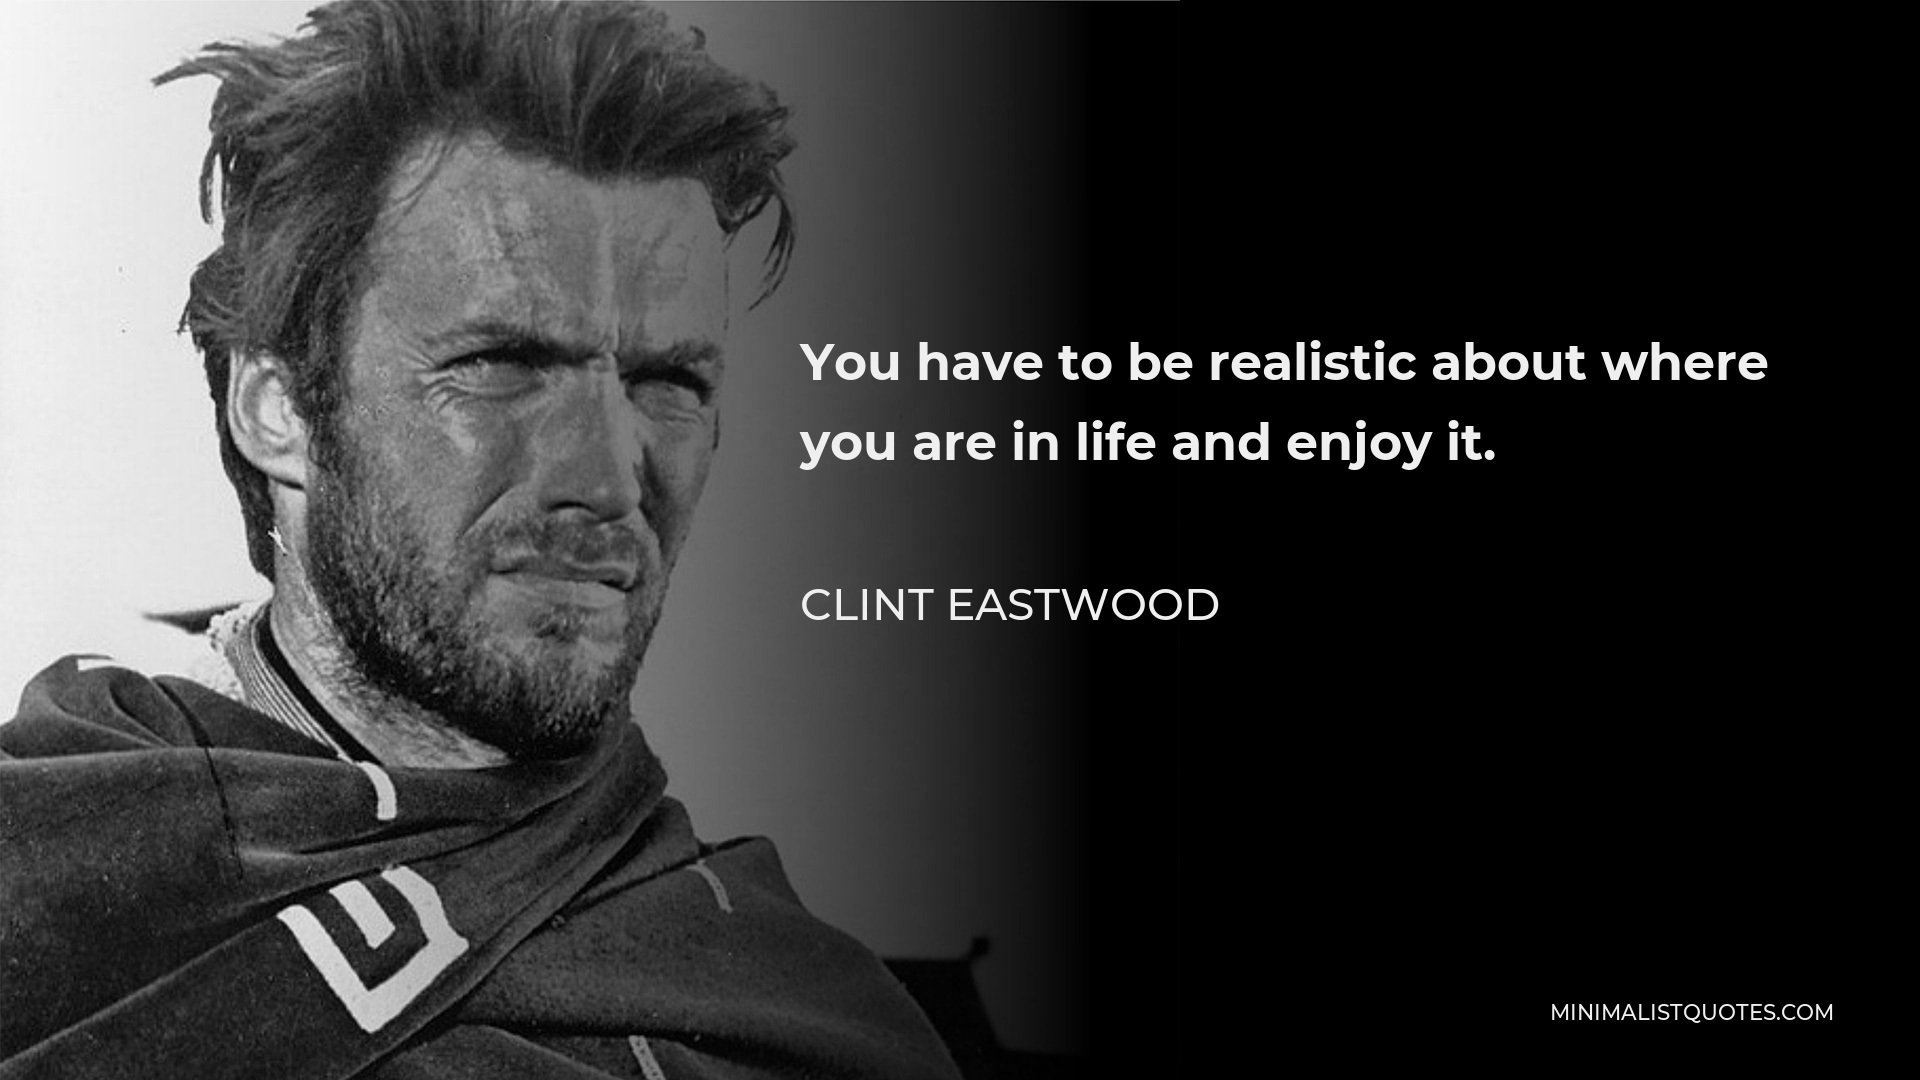 Clint Eastwood Quote - You have to be realistic about where you are in life and enjoy it.